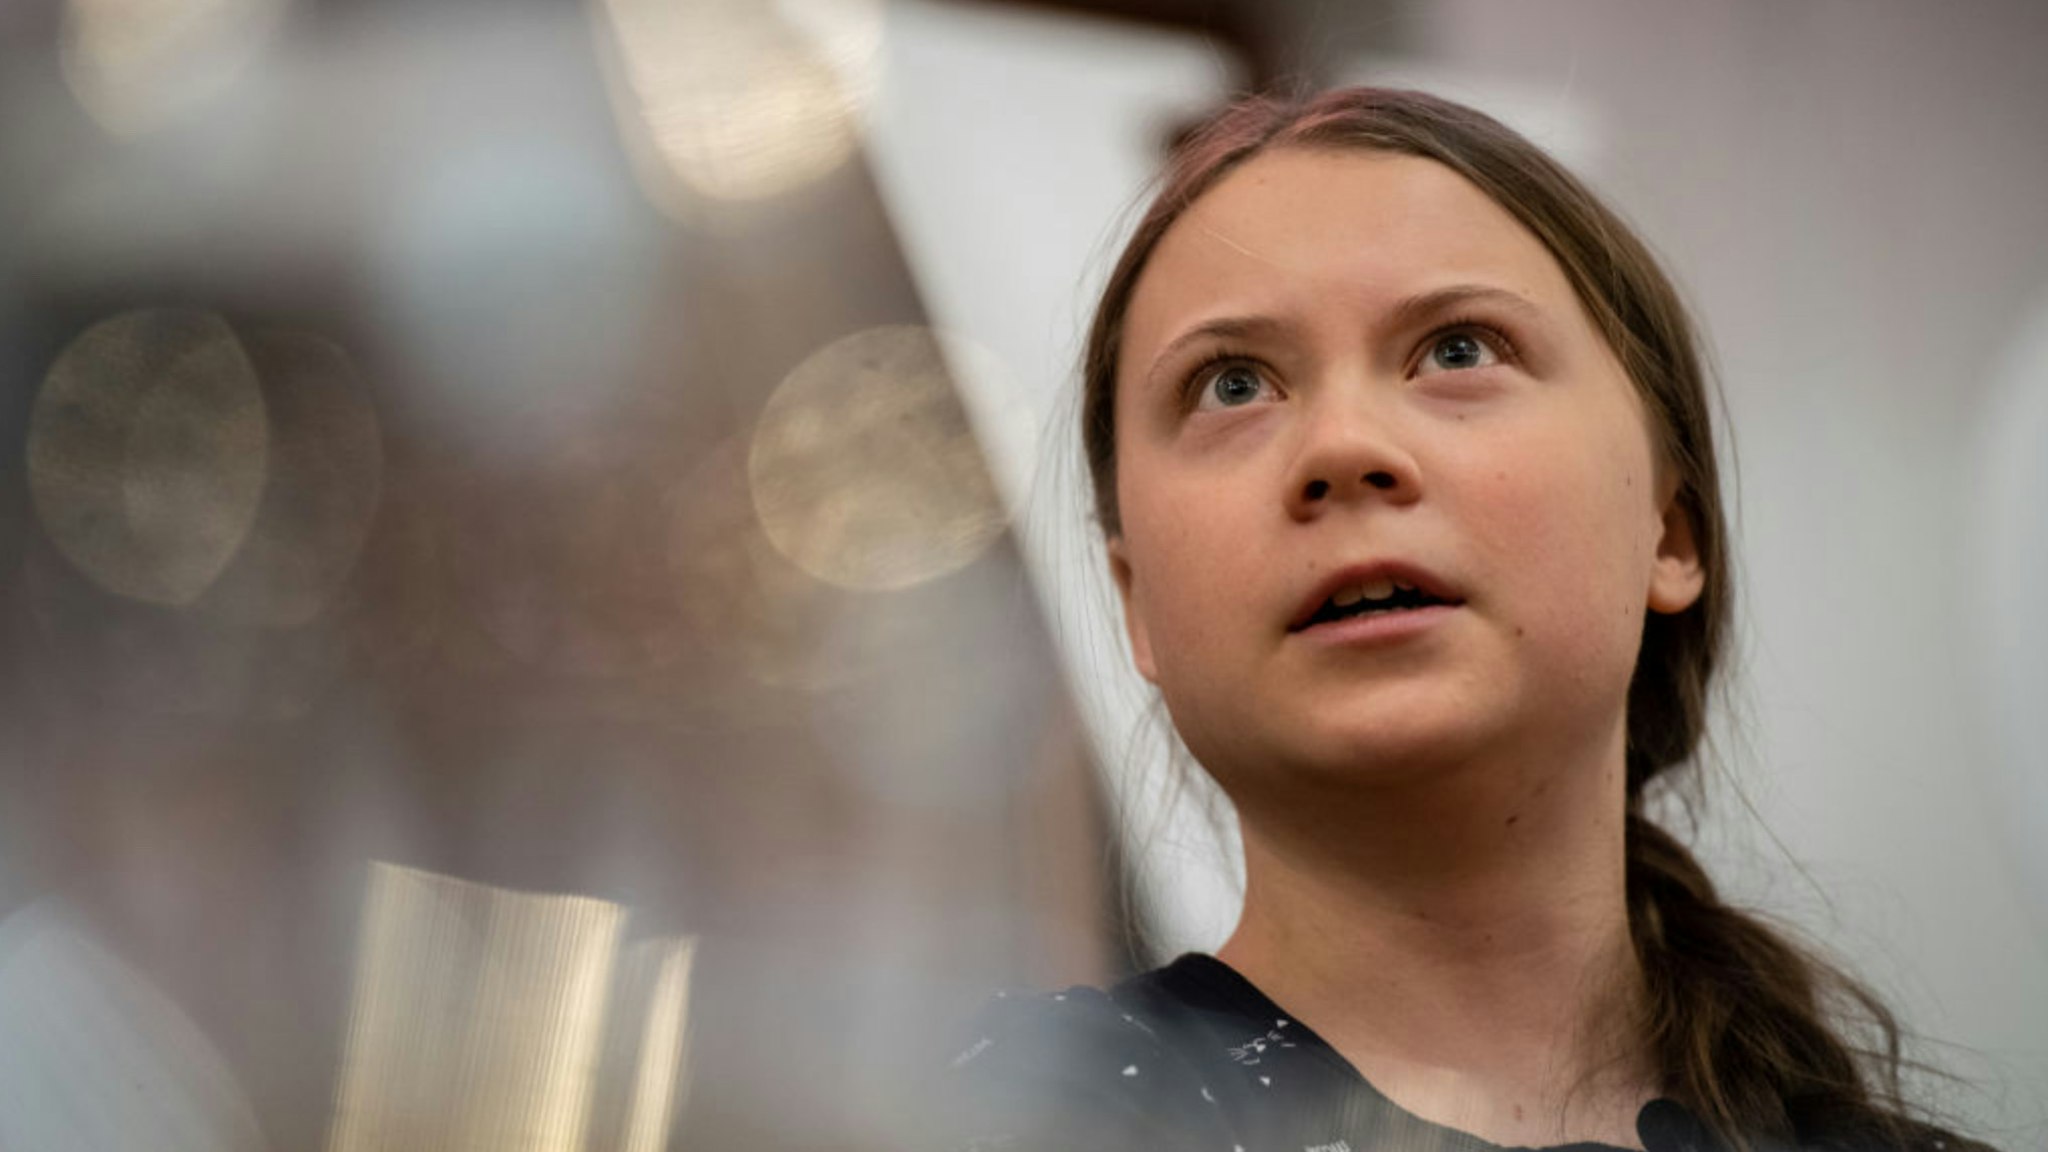 Greta Thunberg speaks at an event with other climate activists on April 22, 2019 in London, England.